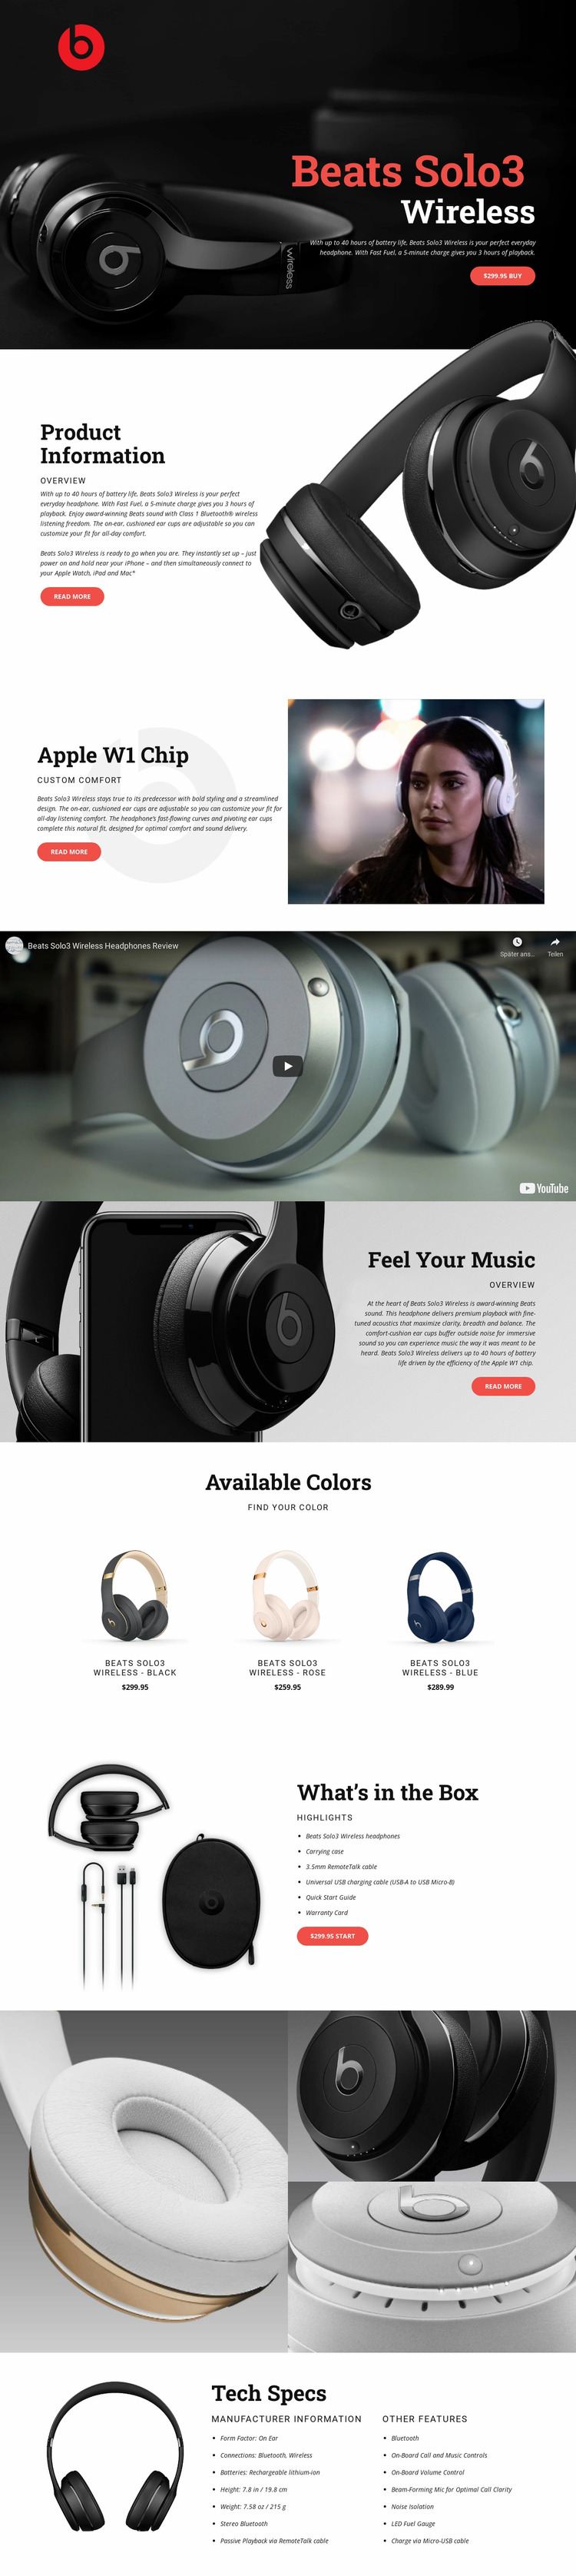 Outstanding quality of music Website Mockup